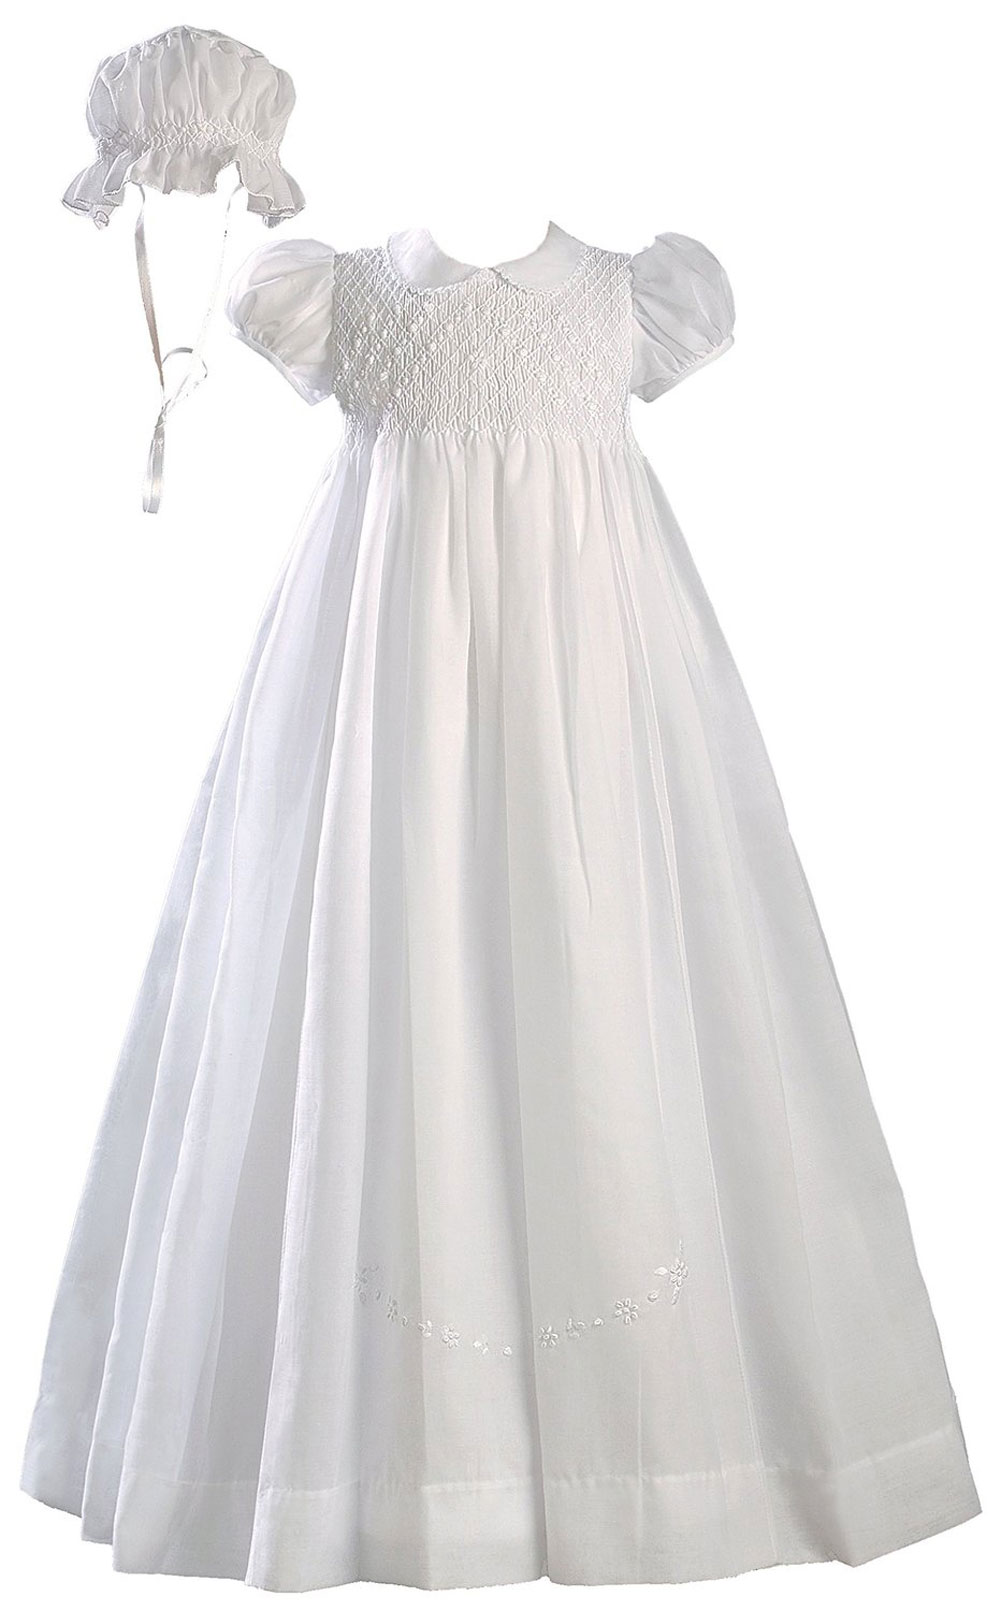 Girls White 32" Hand Smocked Polycotton Batiste Christening Baptism Gown - Little Things Mean a Lot